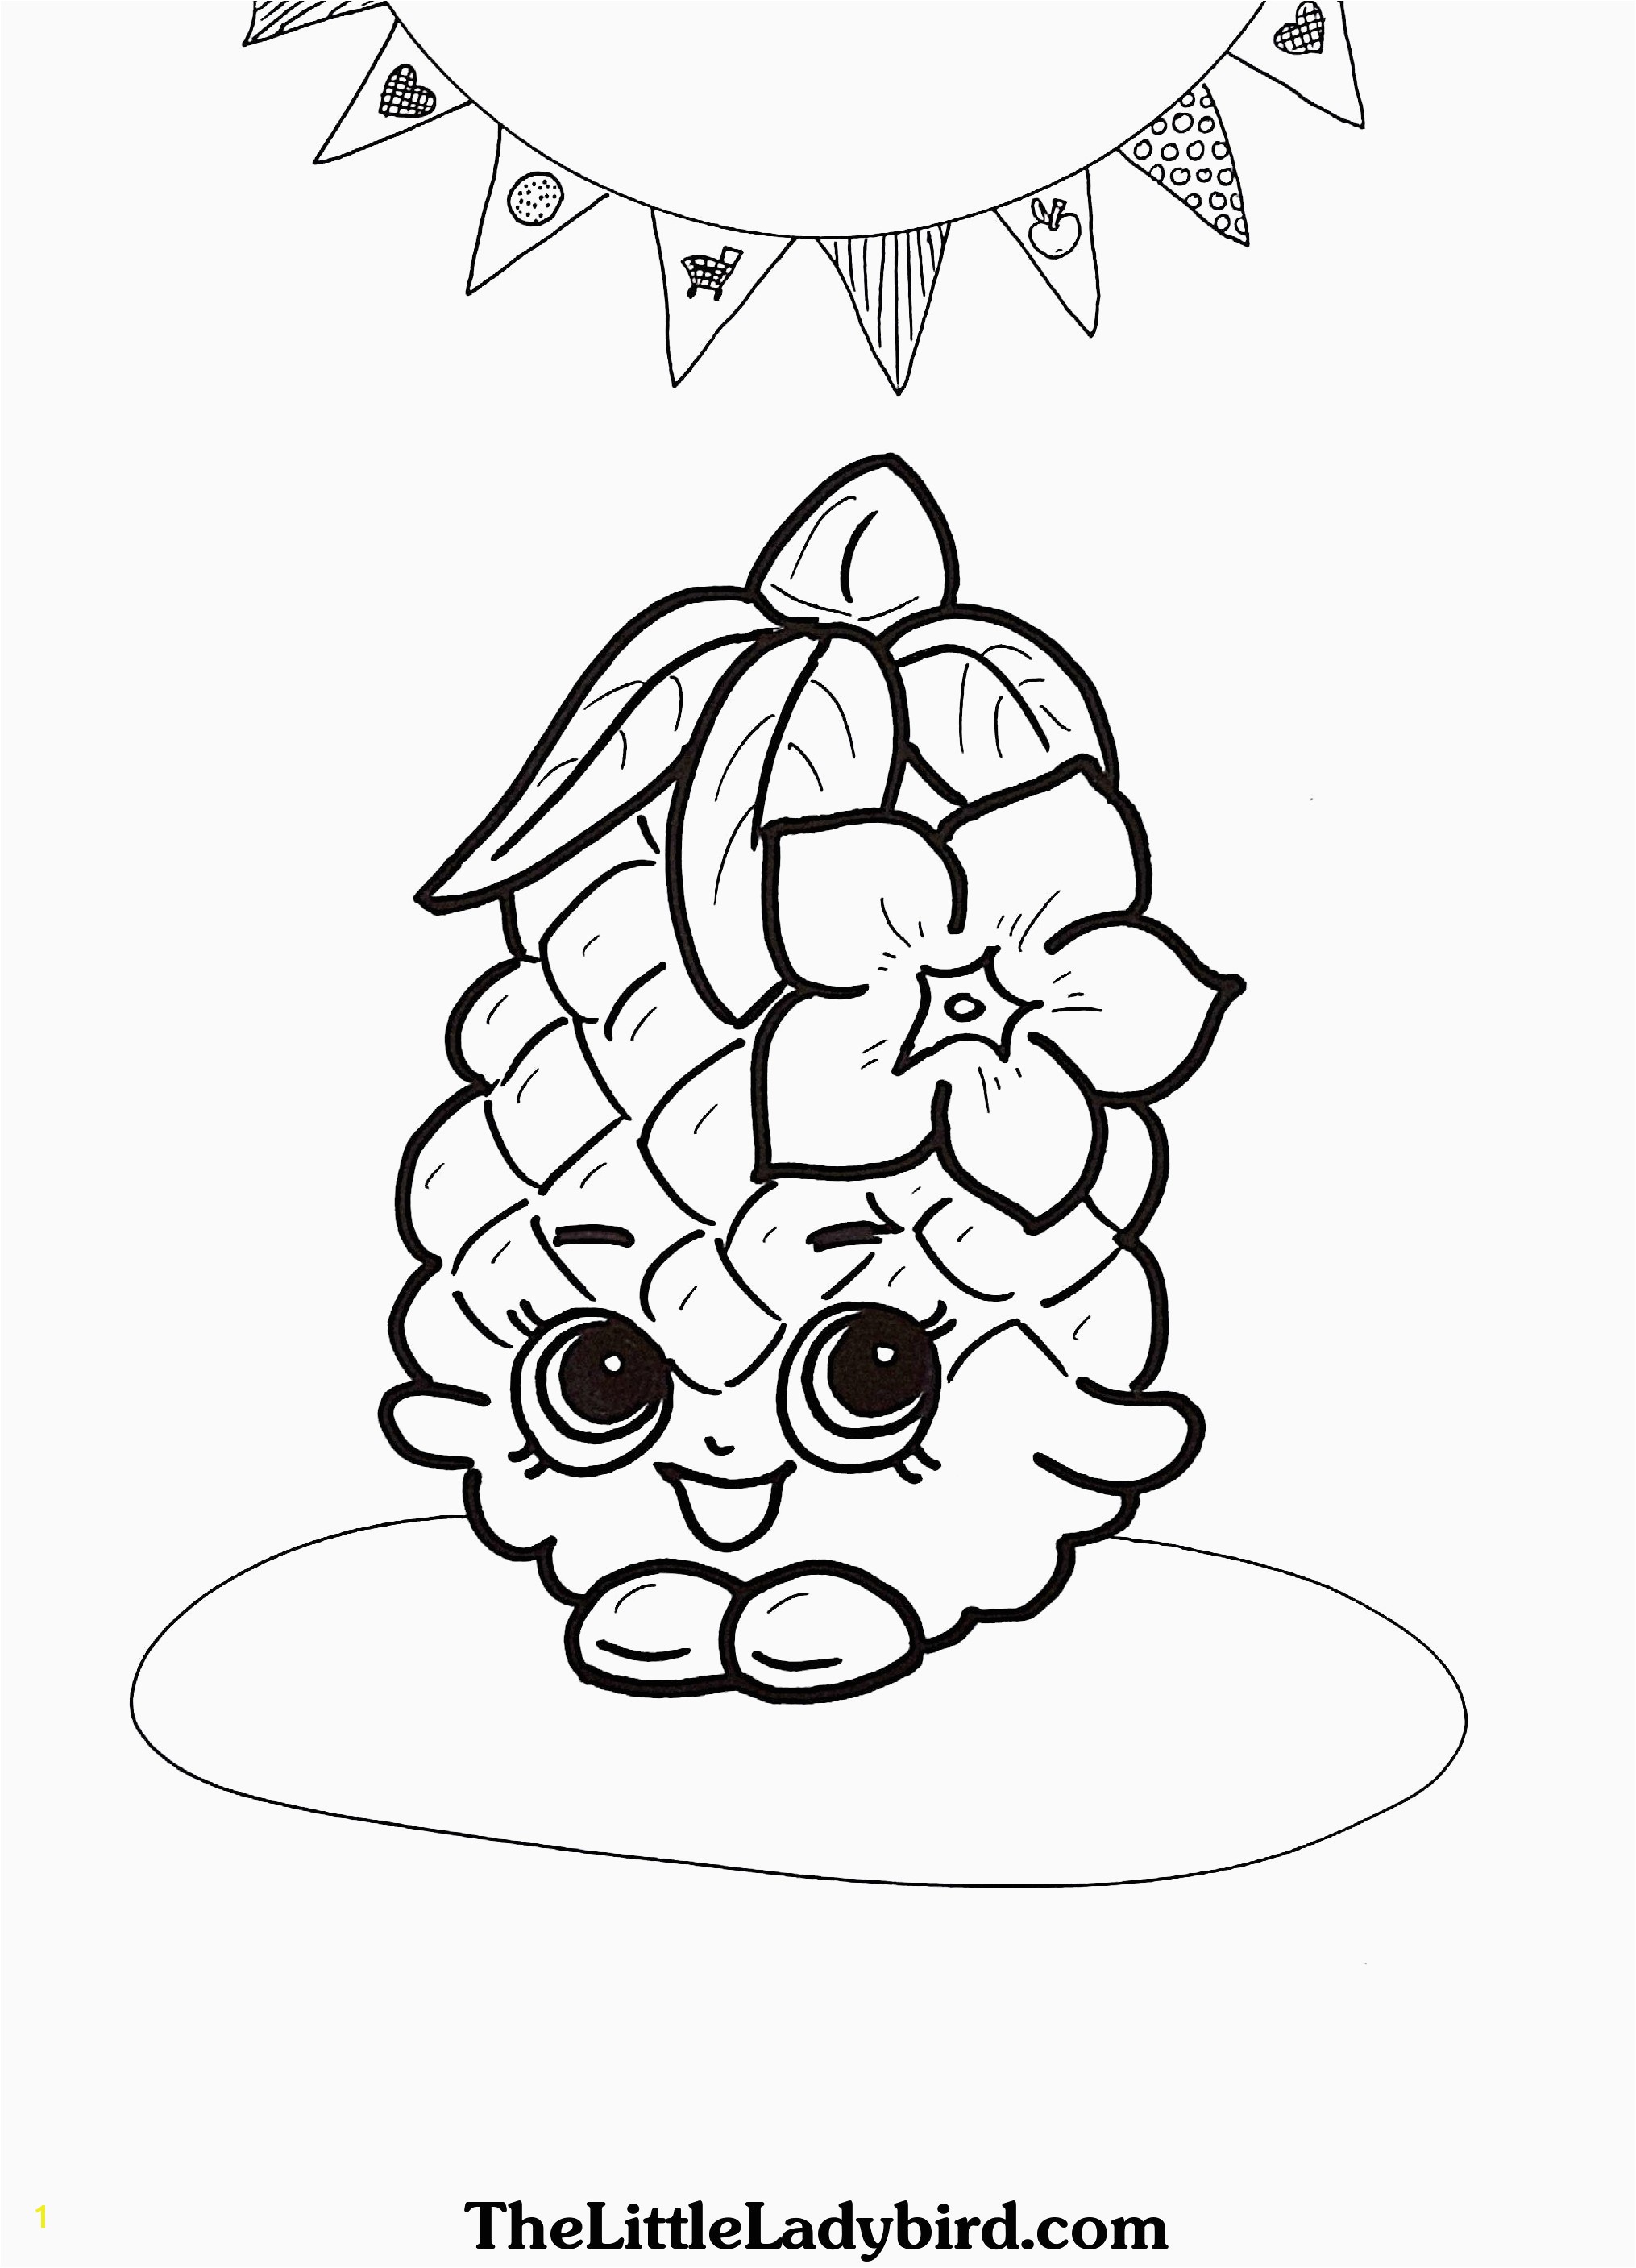 Poptropica Coloring Pages Fun Things to Color Inspirational Cool Coloring Page Unique Witch